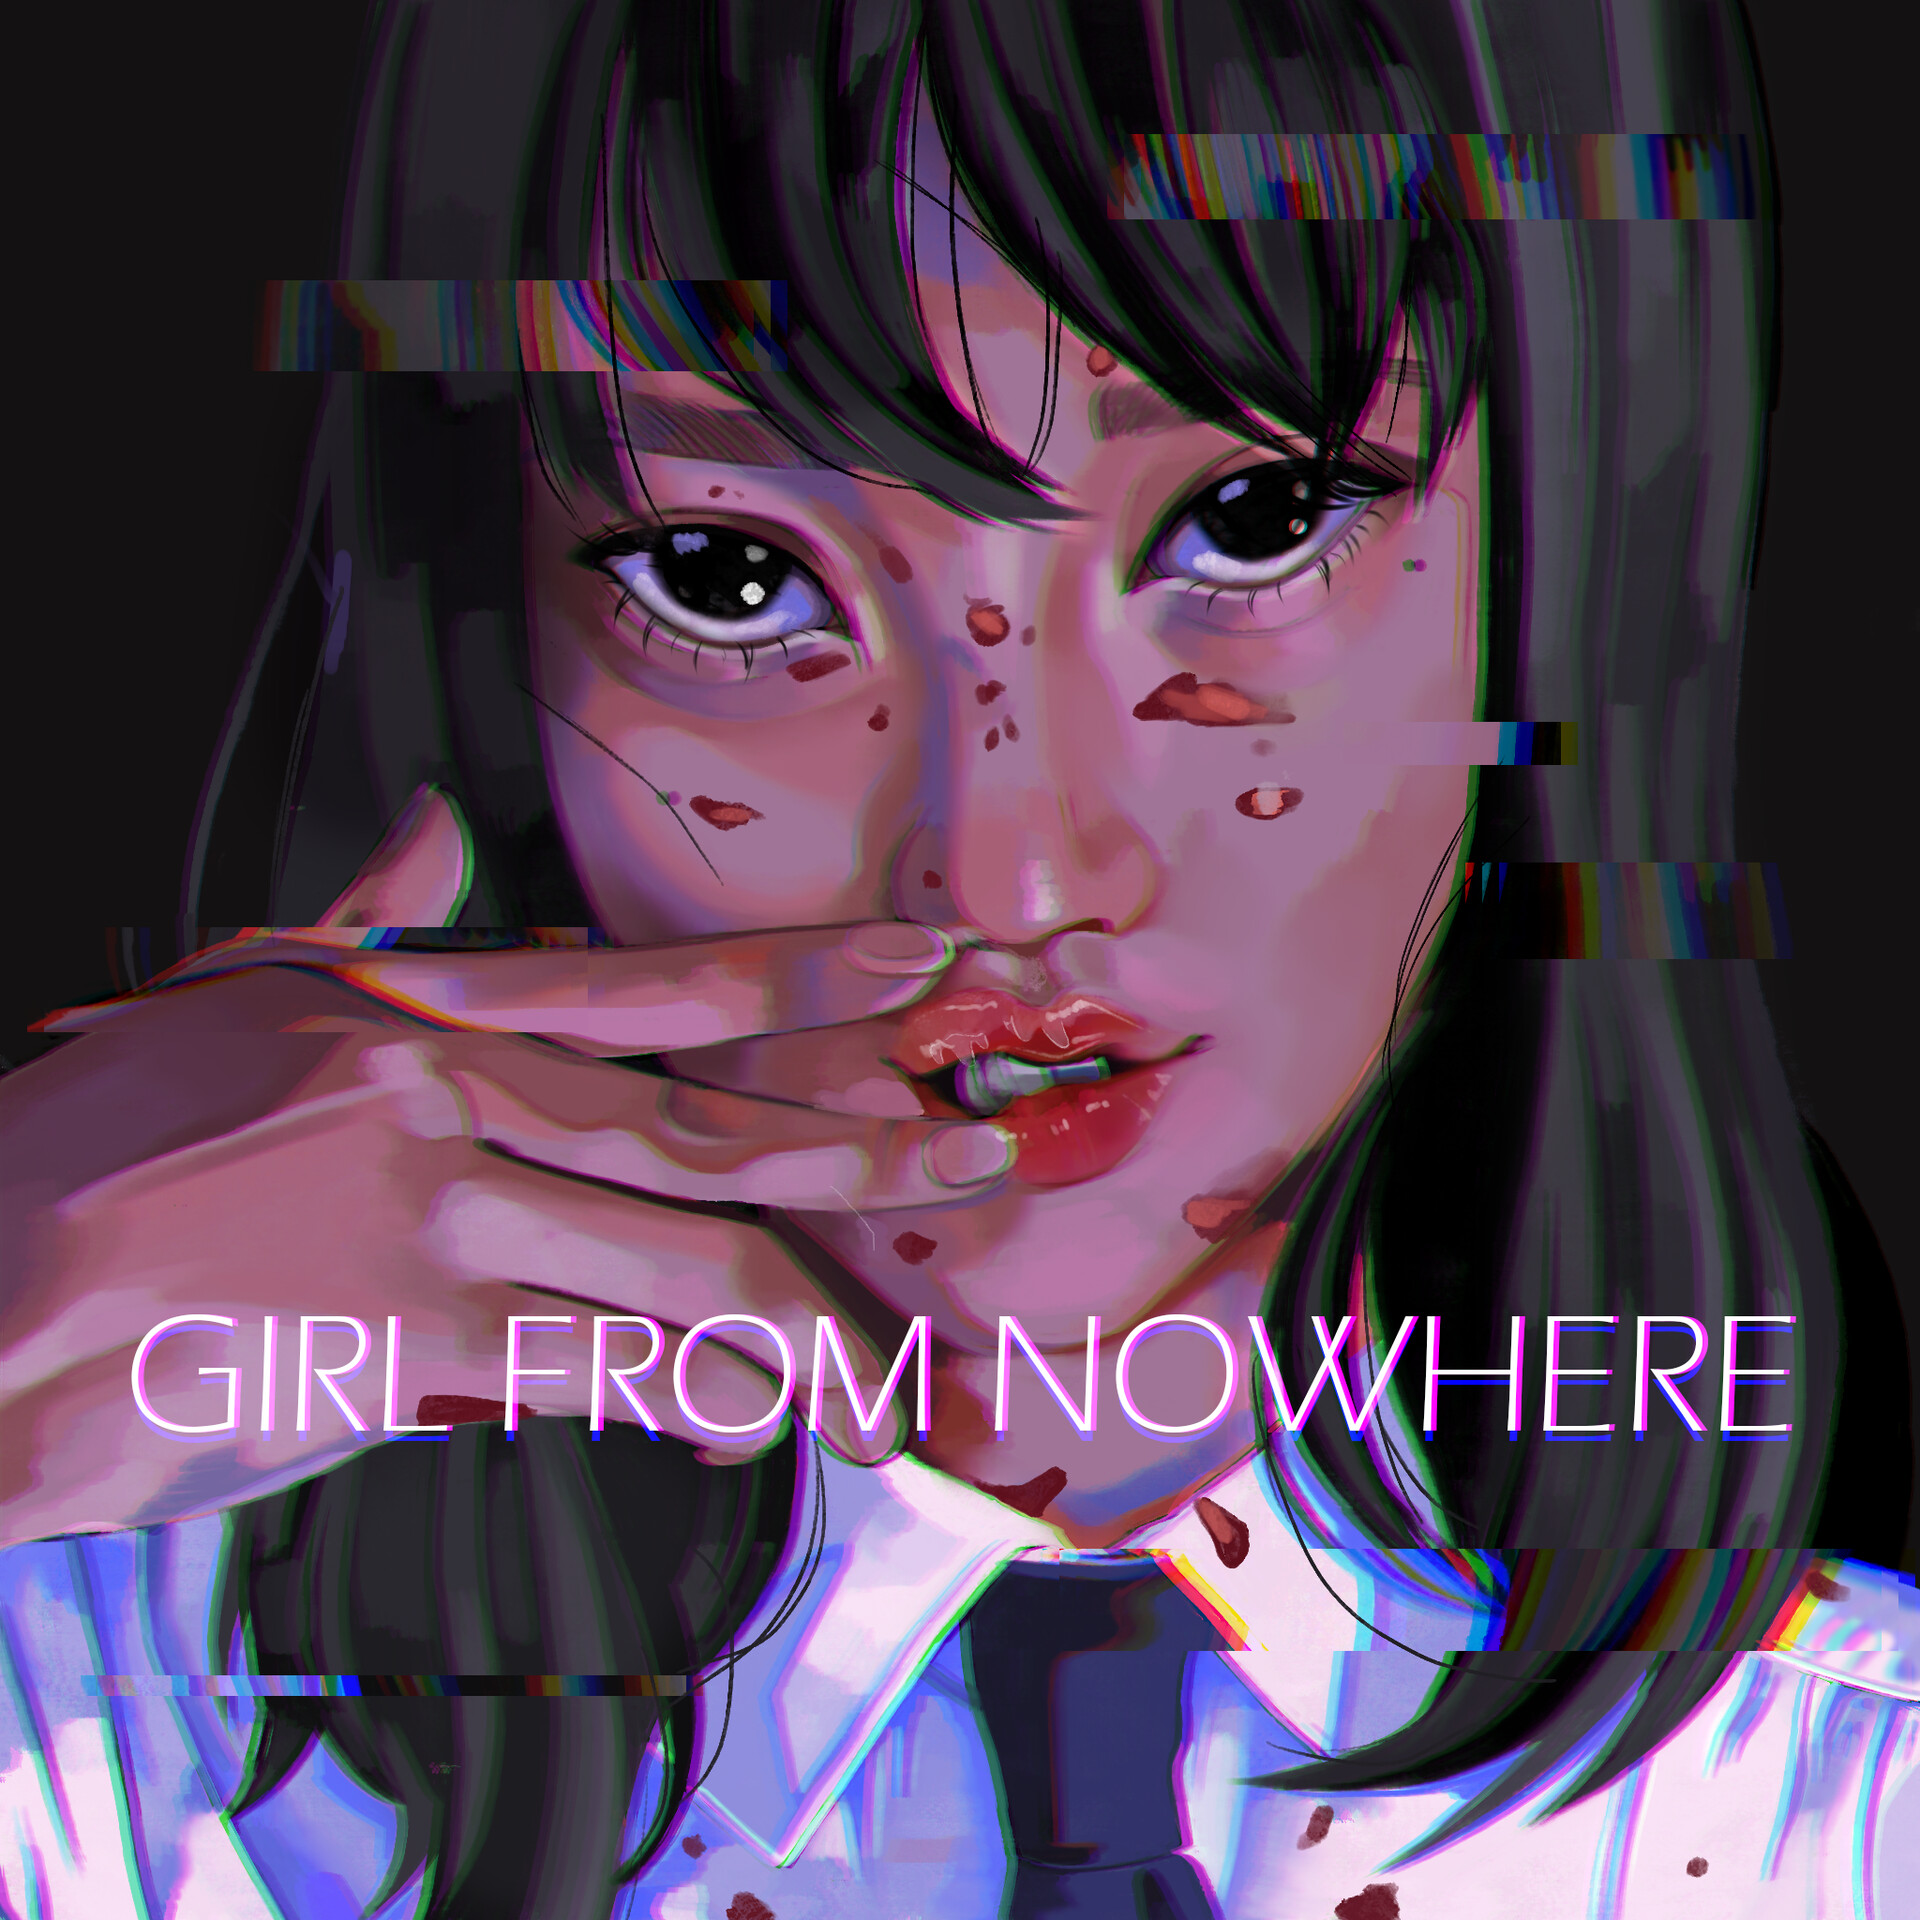 Girls from nowhere